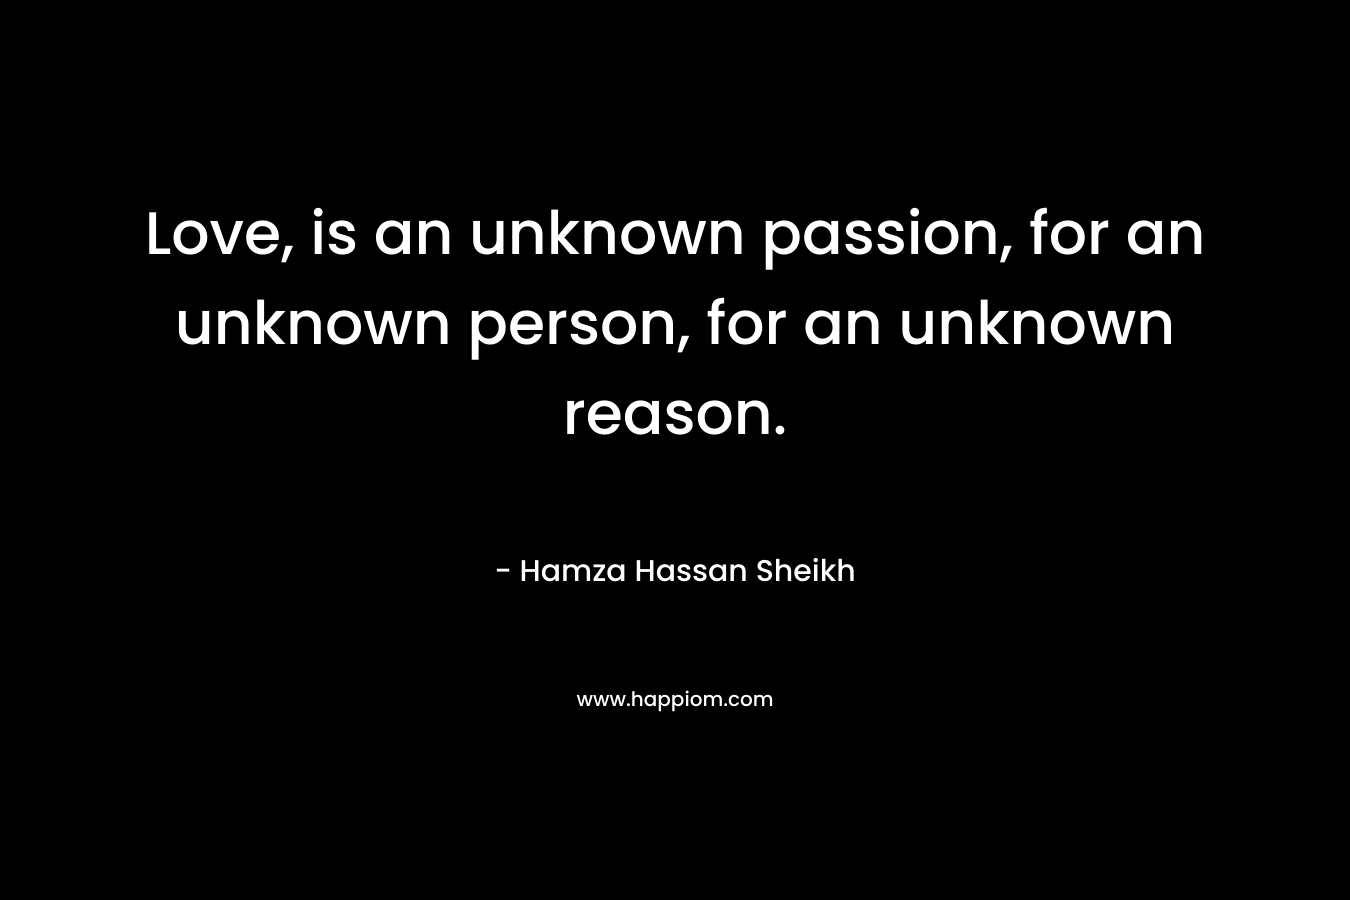 Love, is an unknown passion, for an unknown person, for an unknown reason.